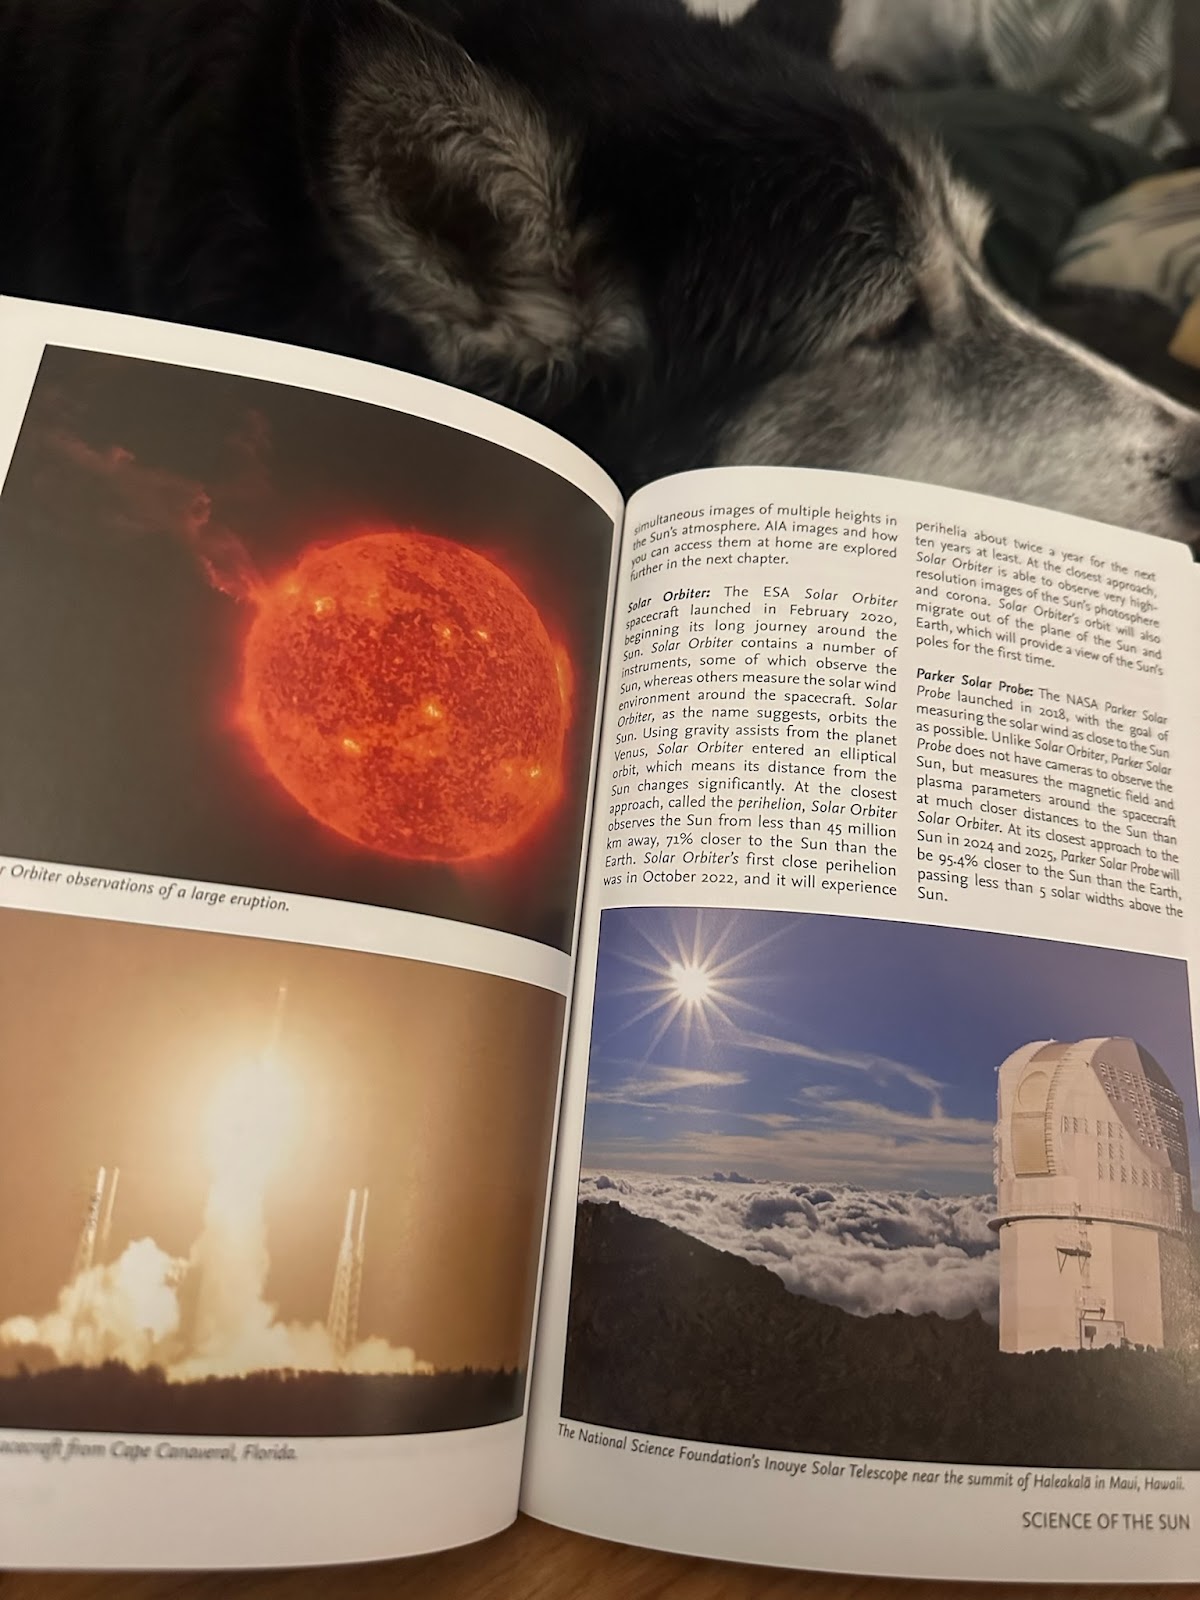 A small book open to a page with a full color image of the sun, another image of an observatory, and a rocket launch. There is a sleepy black and white dog in the background